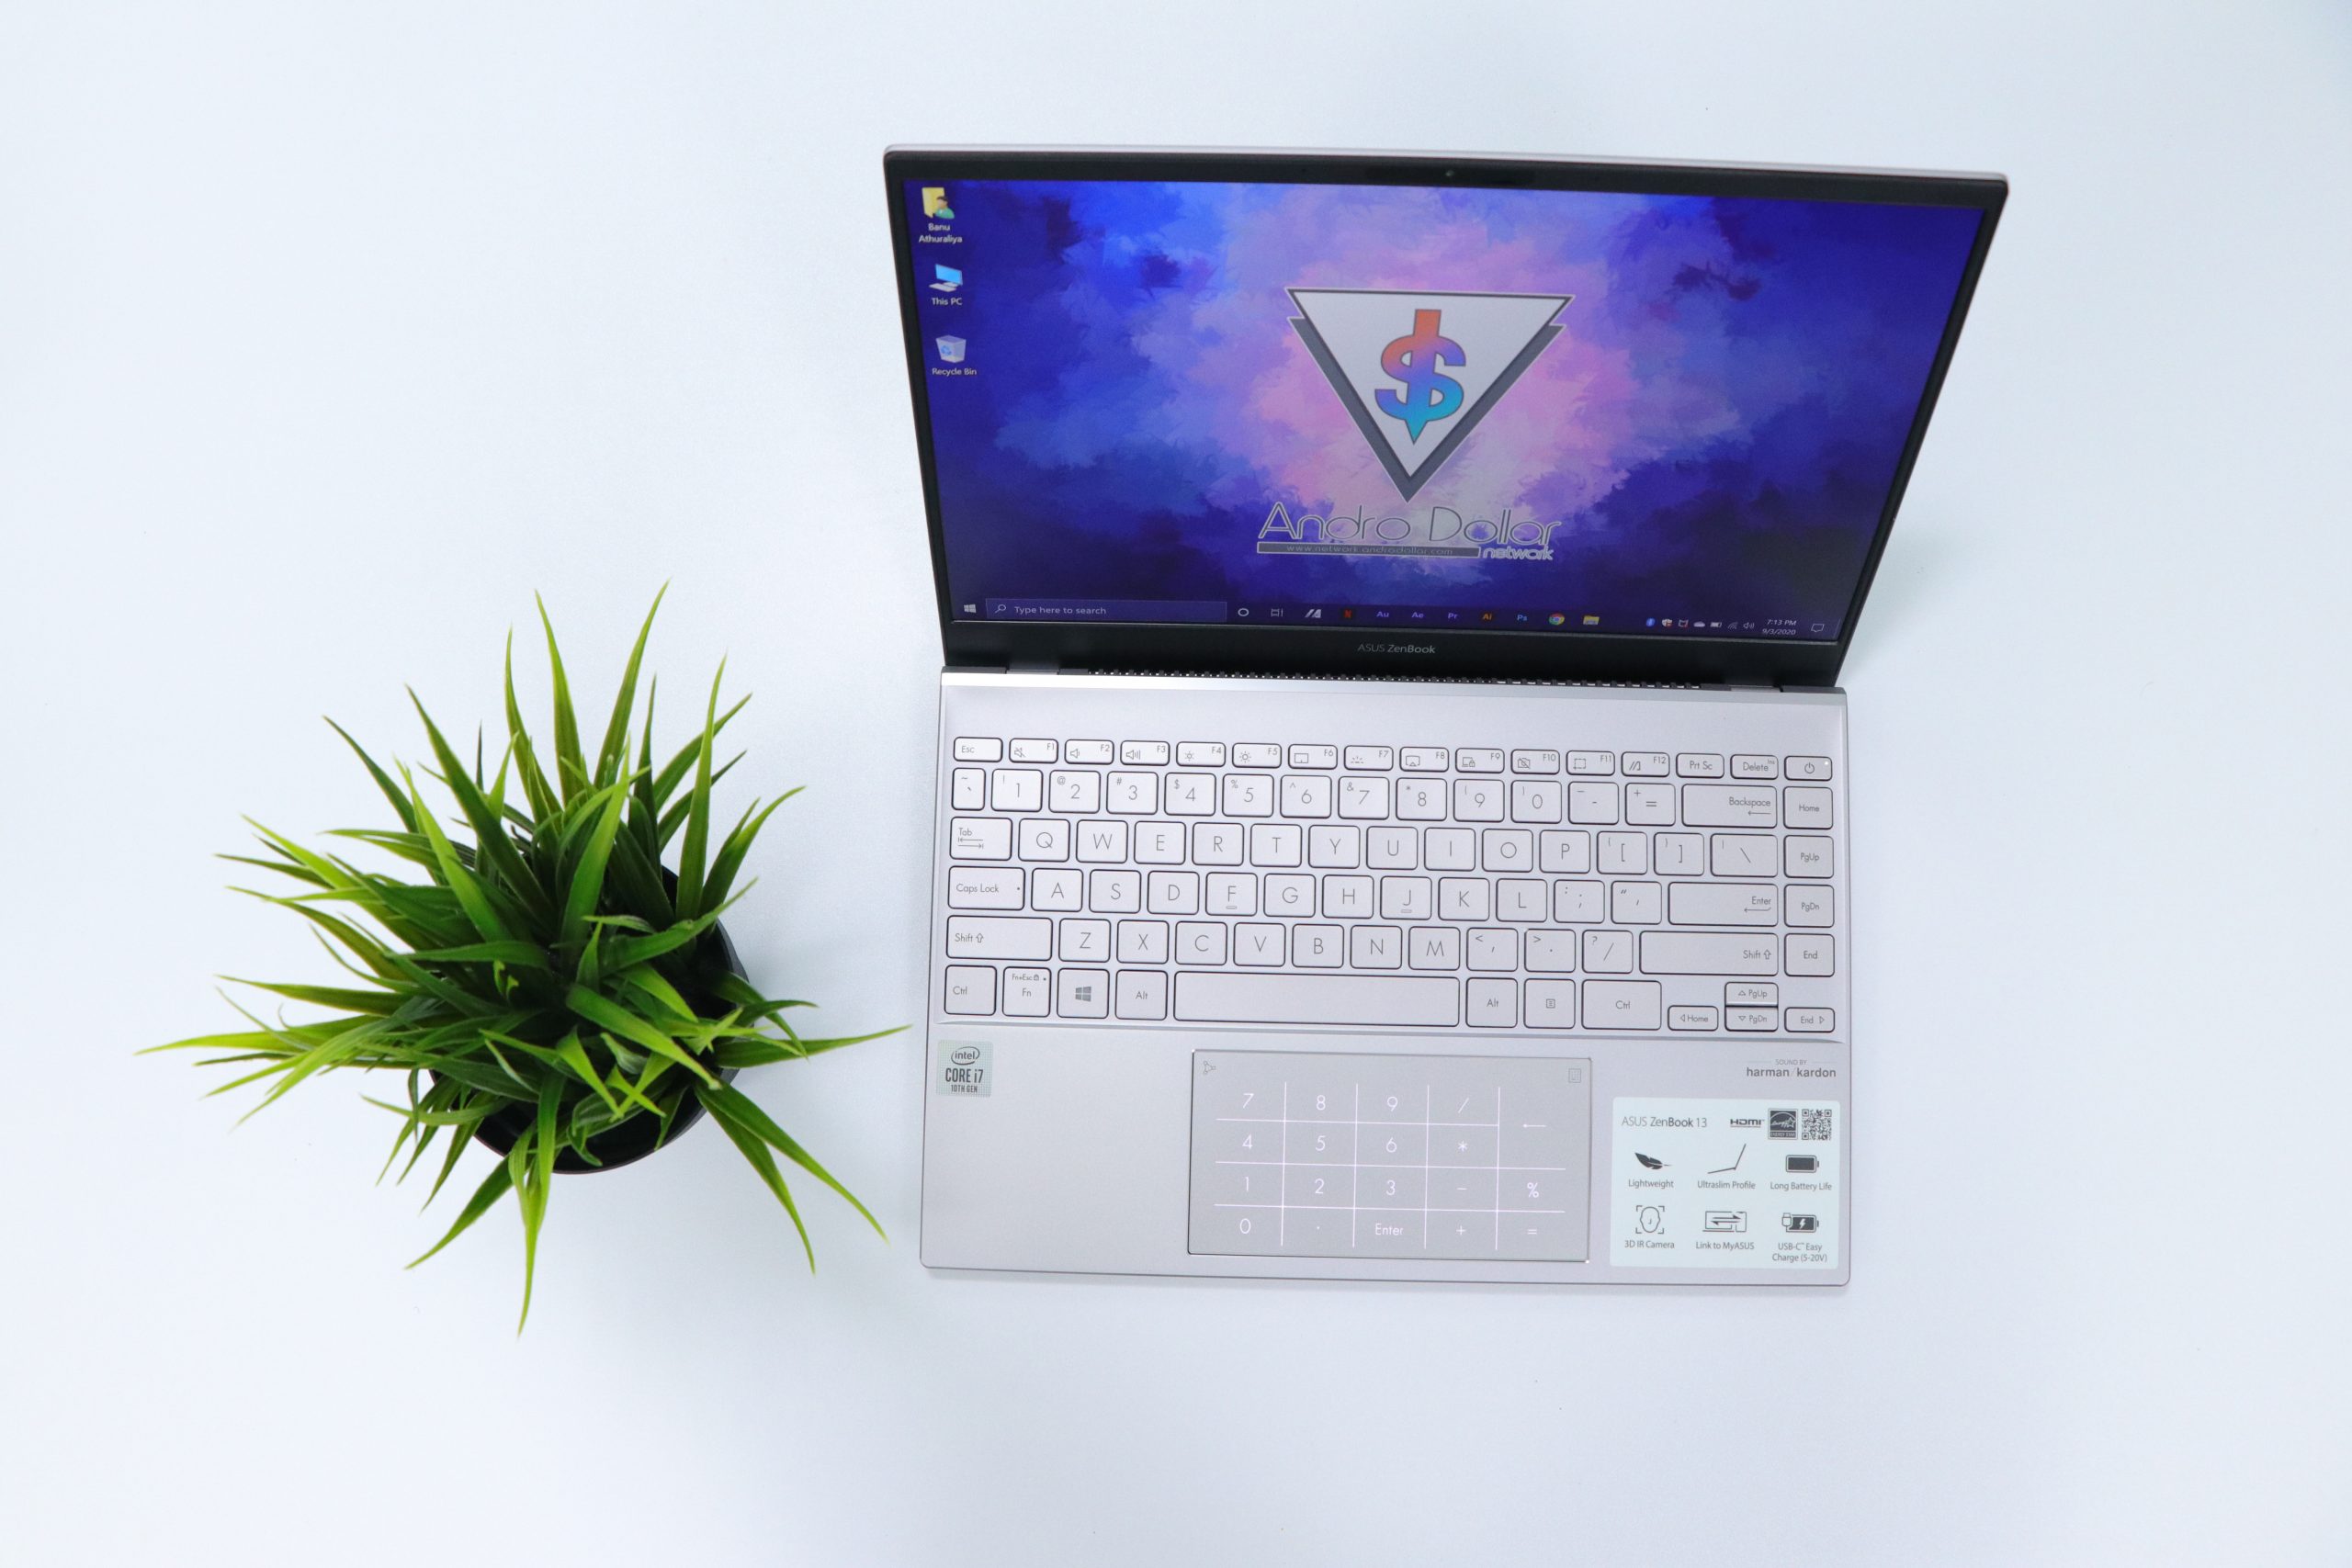 IMG 1952 scaled - Slim and Lightweight Laptop with Good Battery life to buy in 2020 - Asus ZenBook 13 Review